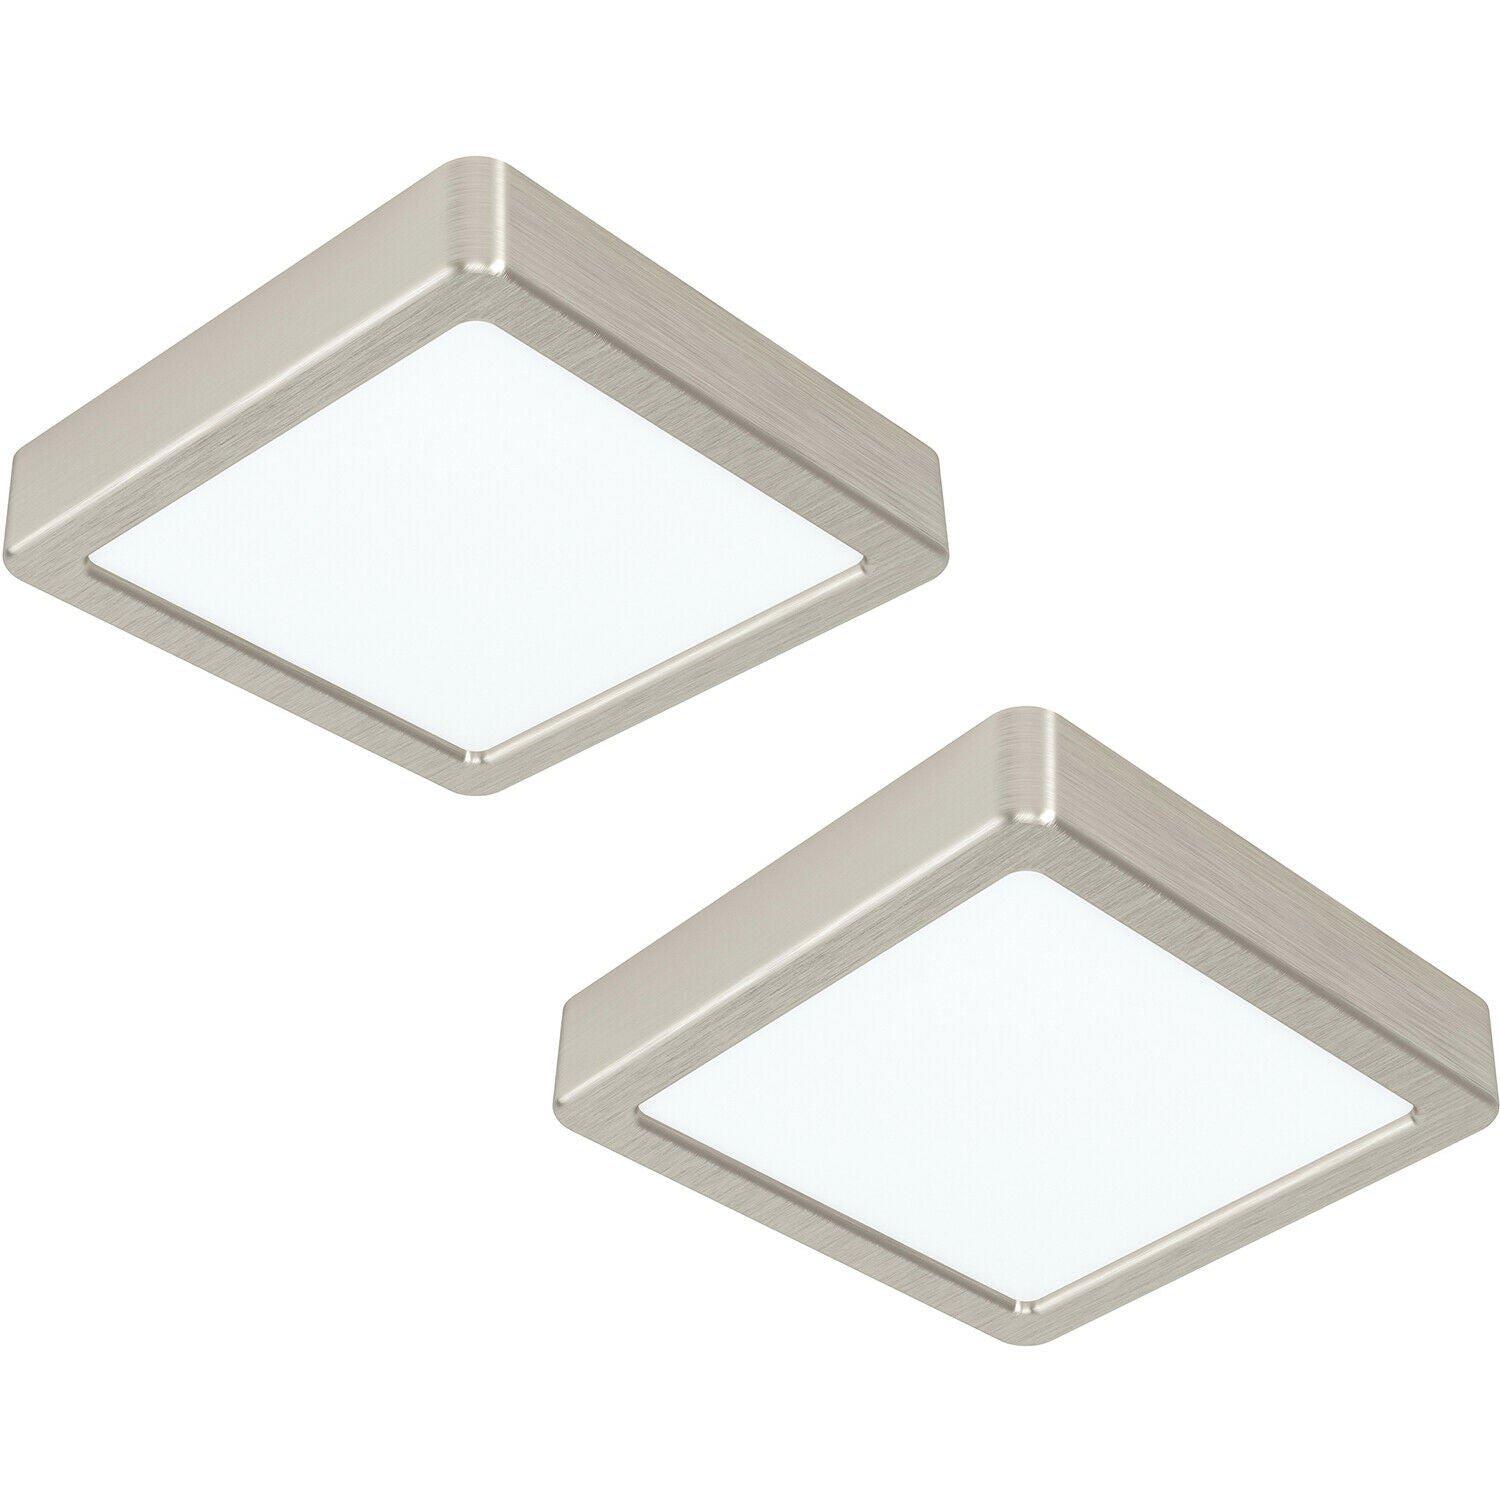 2 PACK Ceiling Light Satin Nickel 160mm Sqaure Surface Mounted 10.5W LED 3000K